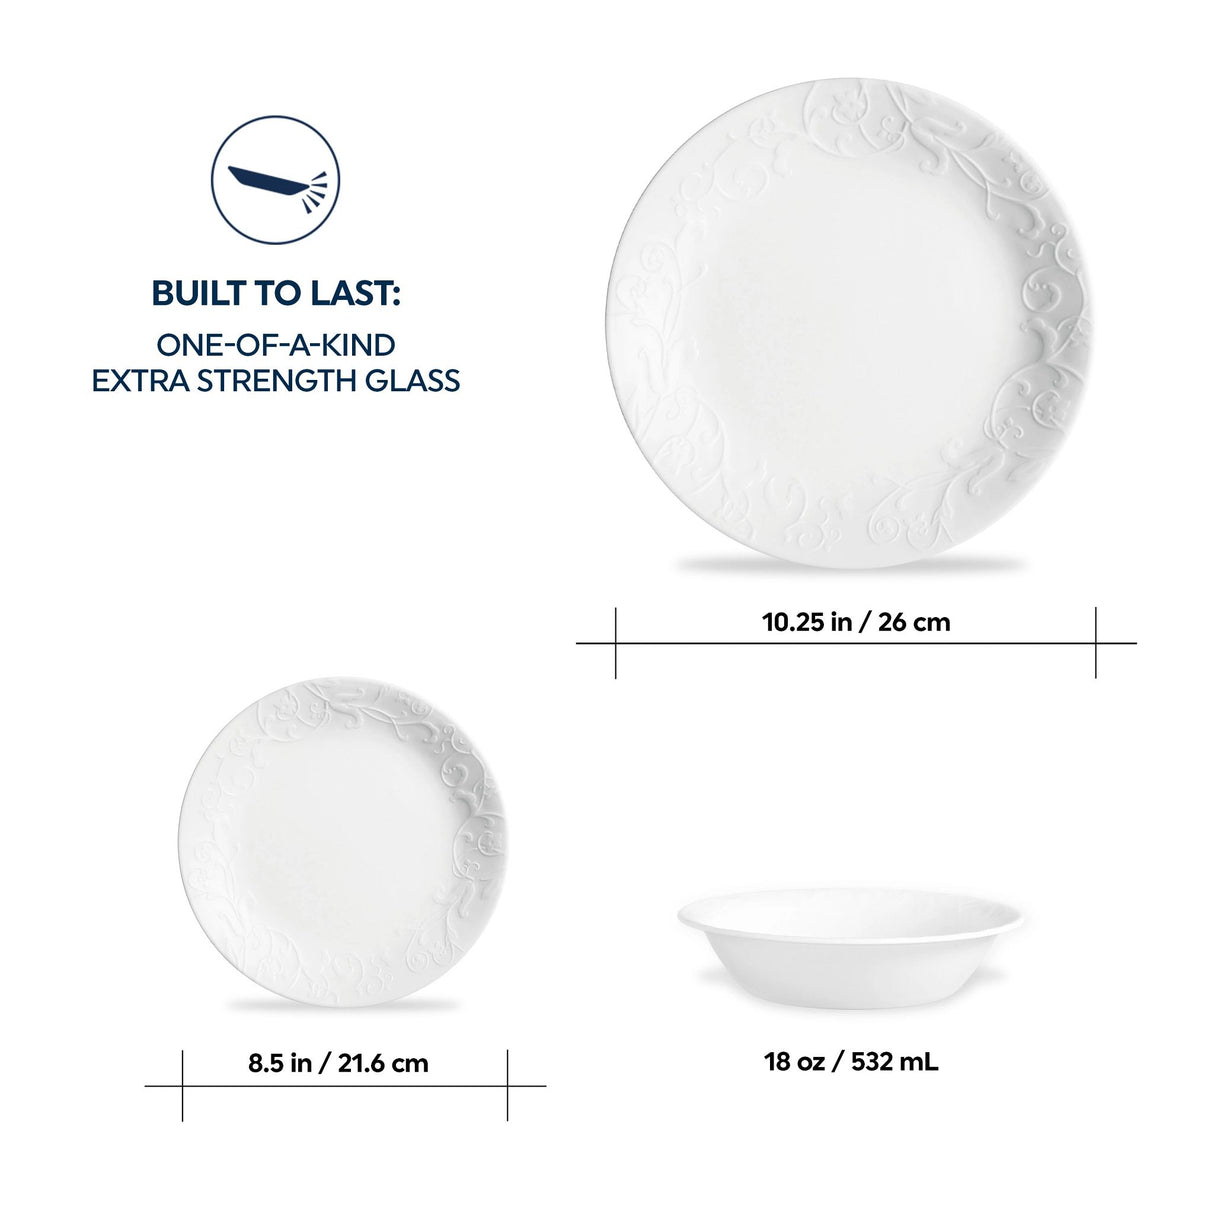  Bella Faenza dinnerplate, lunch plate and cereal bowl with text built to last one of a kind extra strength glass